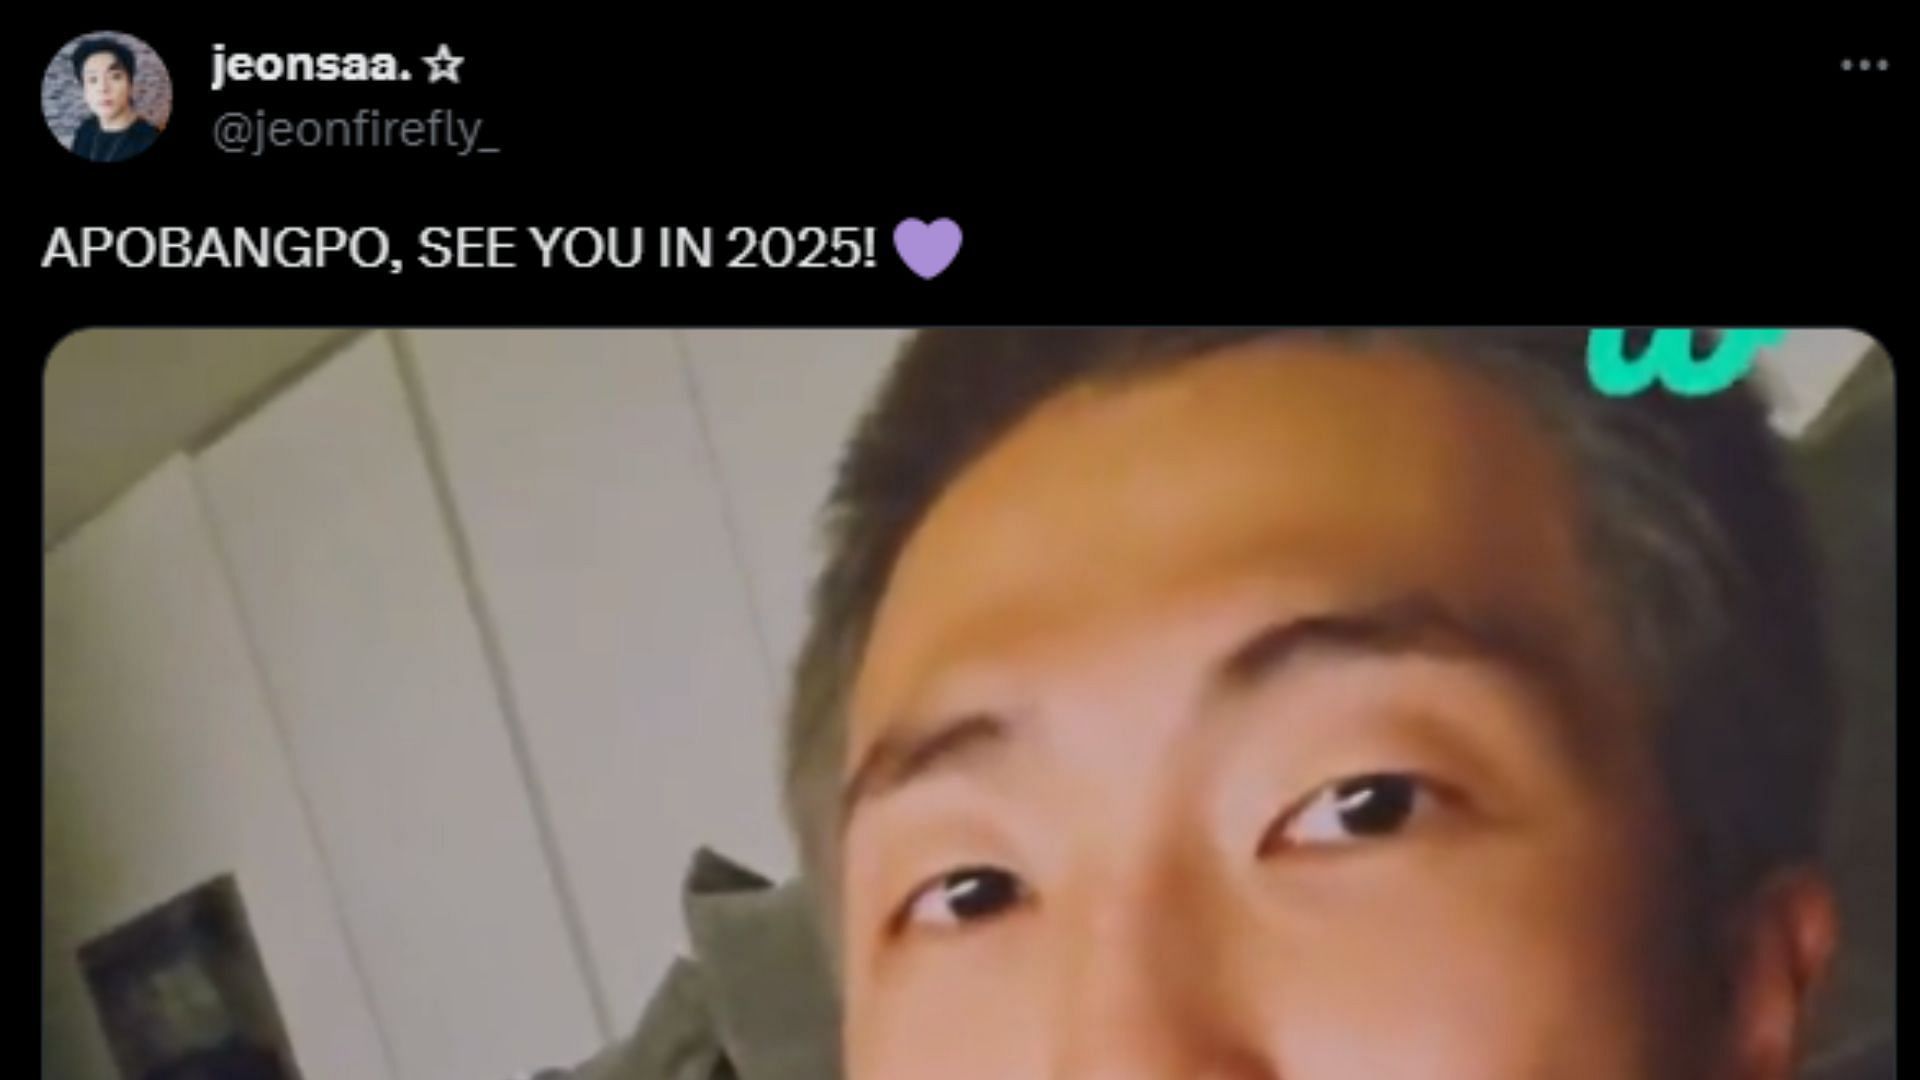 BTS&#039; RM revealed on Weverse live that he really misses his band members (Image via X/@jeonfirefly_)